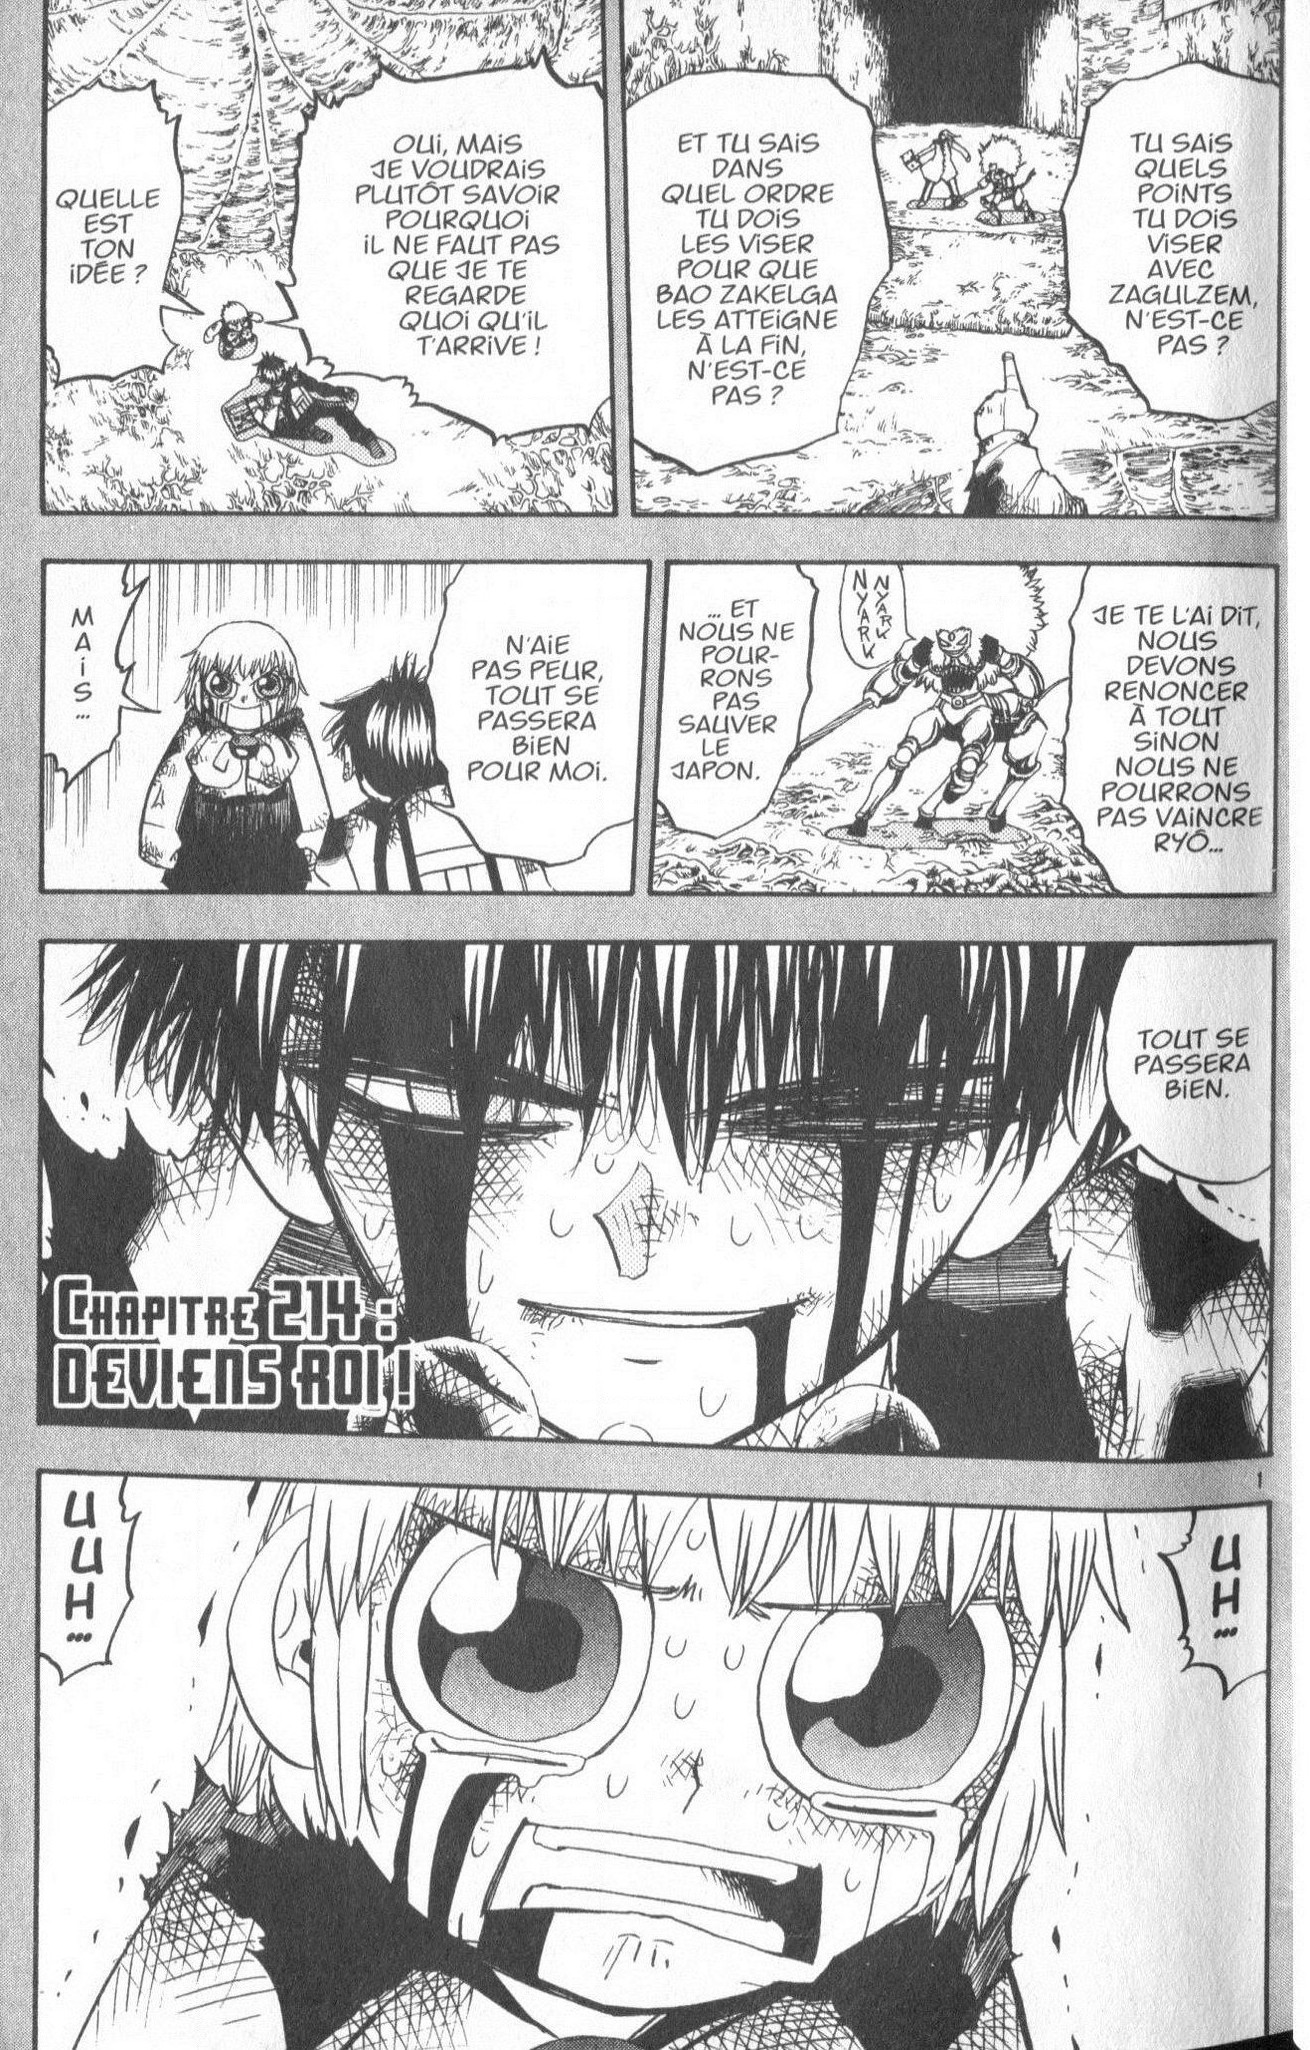 Zatch Bell: Chapter 214 - Page 1